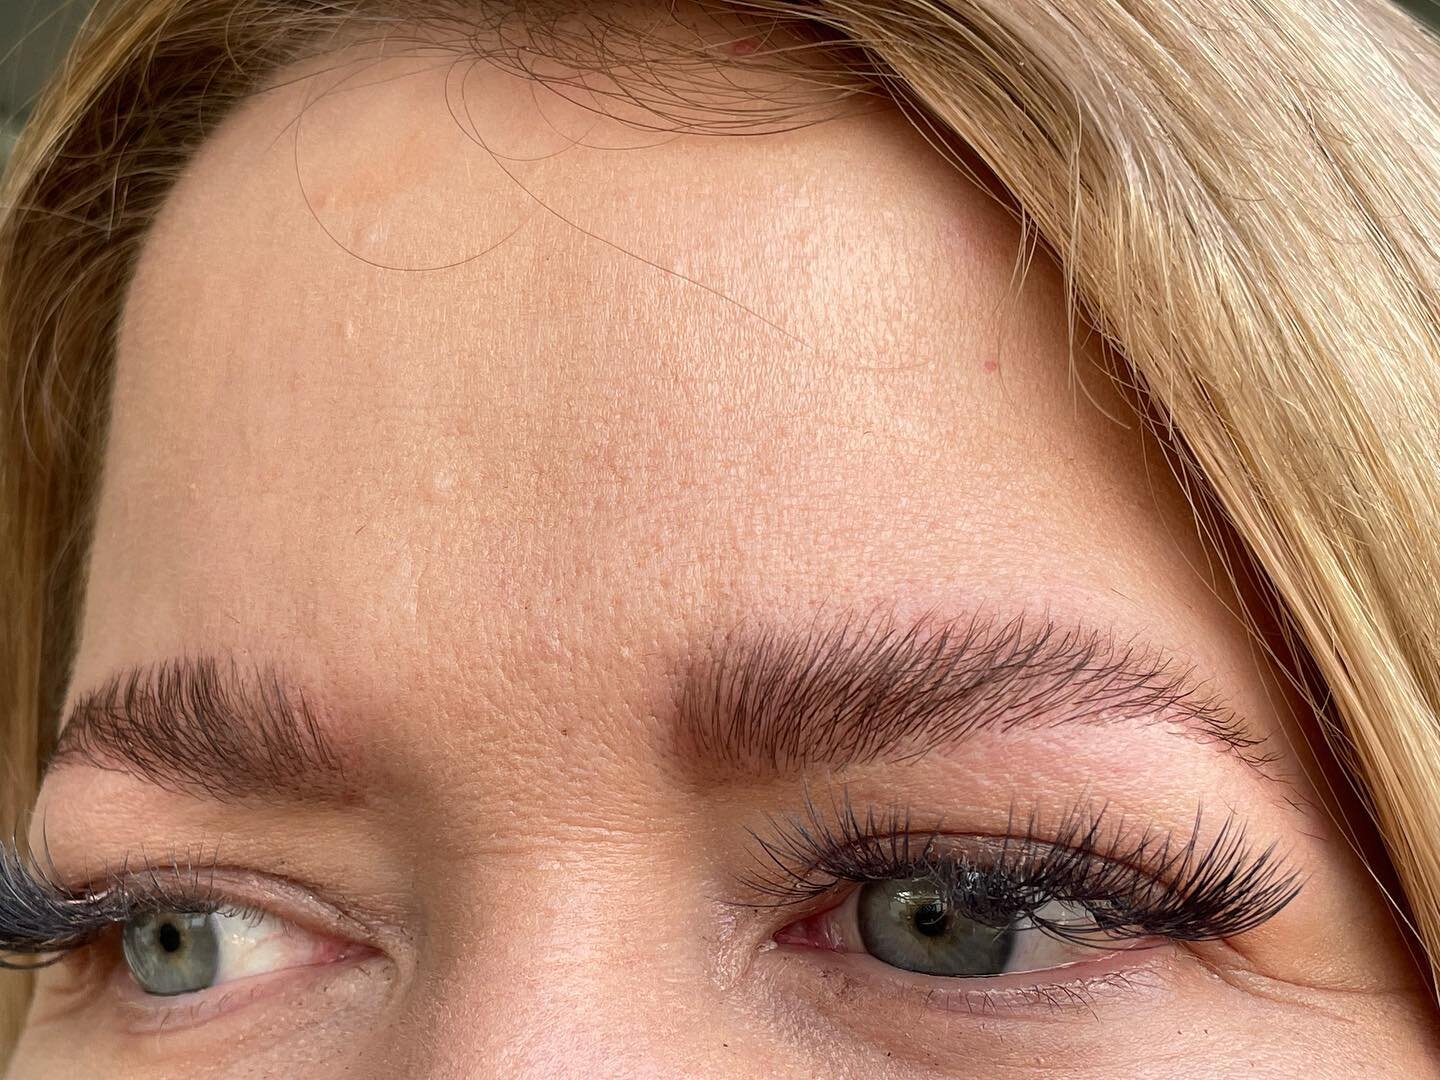 Did you know that we now offer brow lamination in the salon? I mean how could you not want thicker, fuller looking brows? 😝😝

#meccahair #labiosthetiqueaus #greatlengths #purehaircare #browlamination #kalingahairdresser #wooloowin #beautyblog #crue